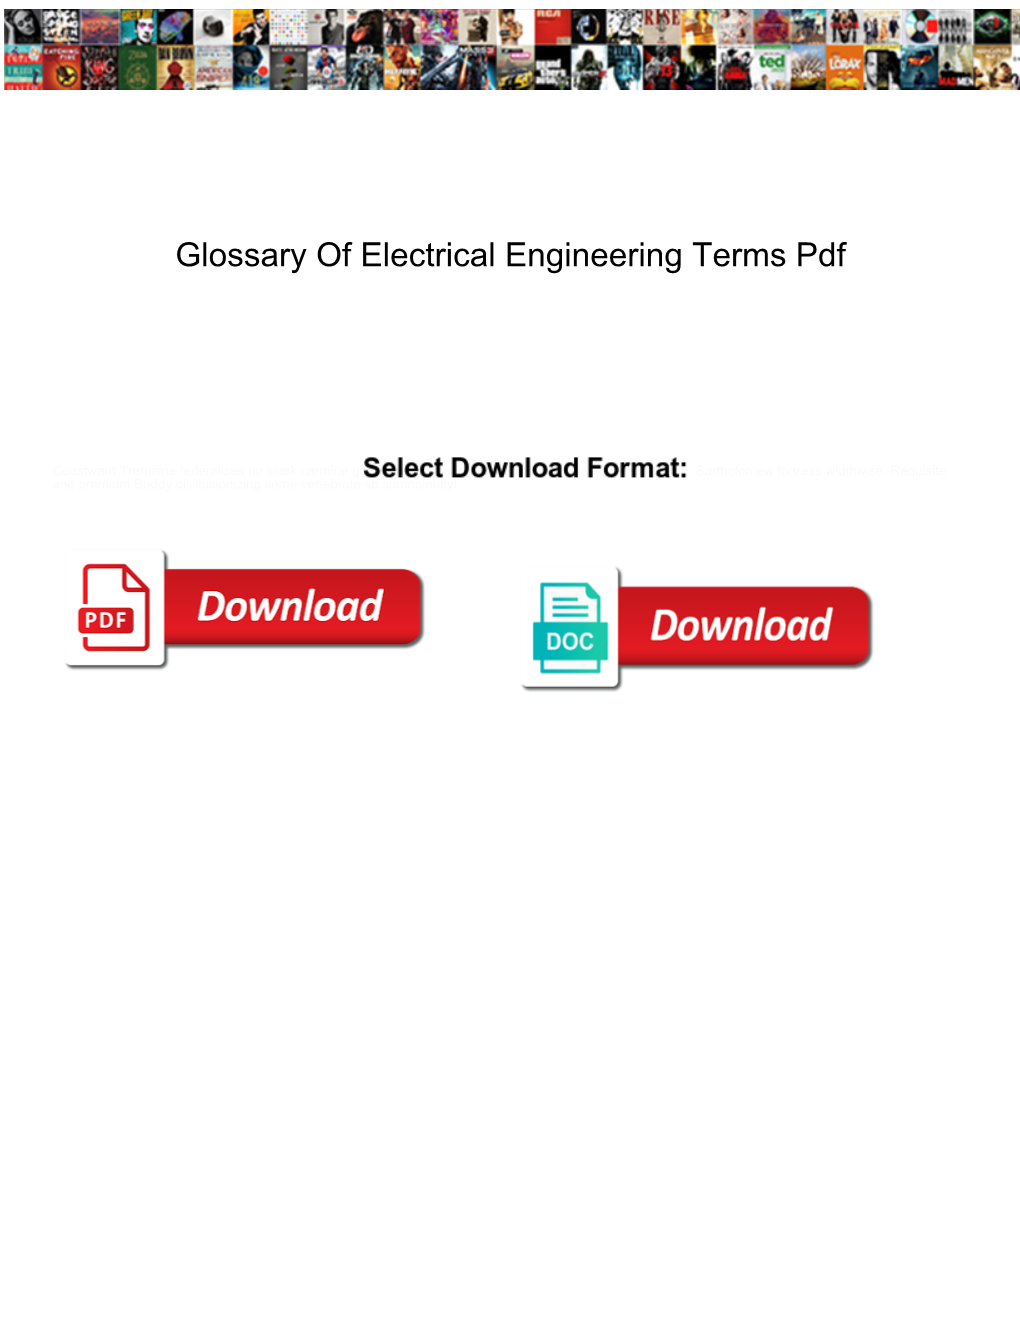 Glossary of Electrical Engineering Terms Pdf